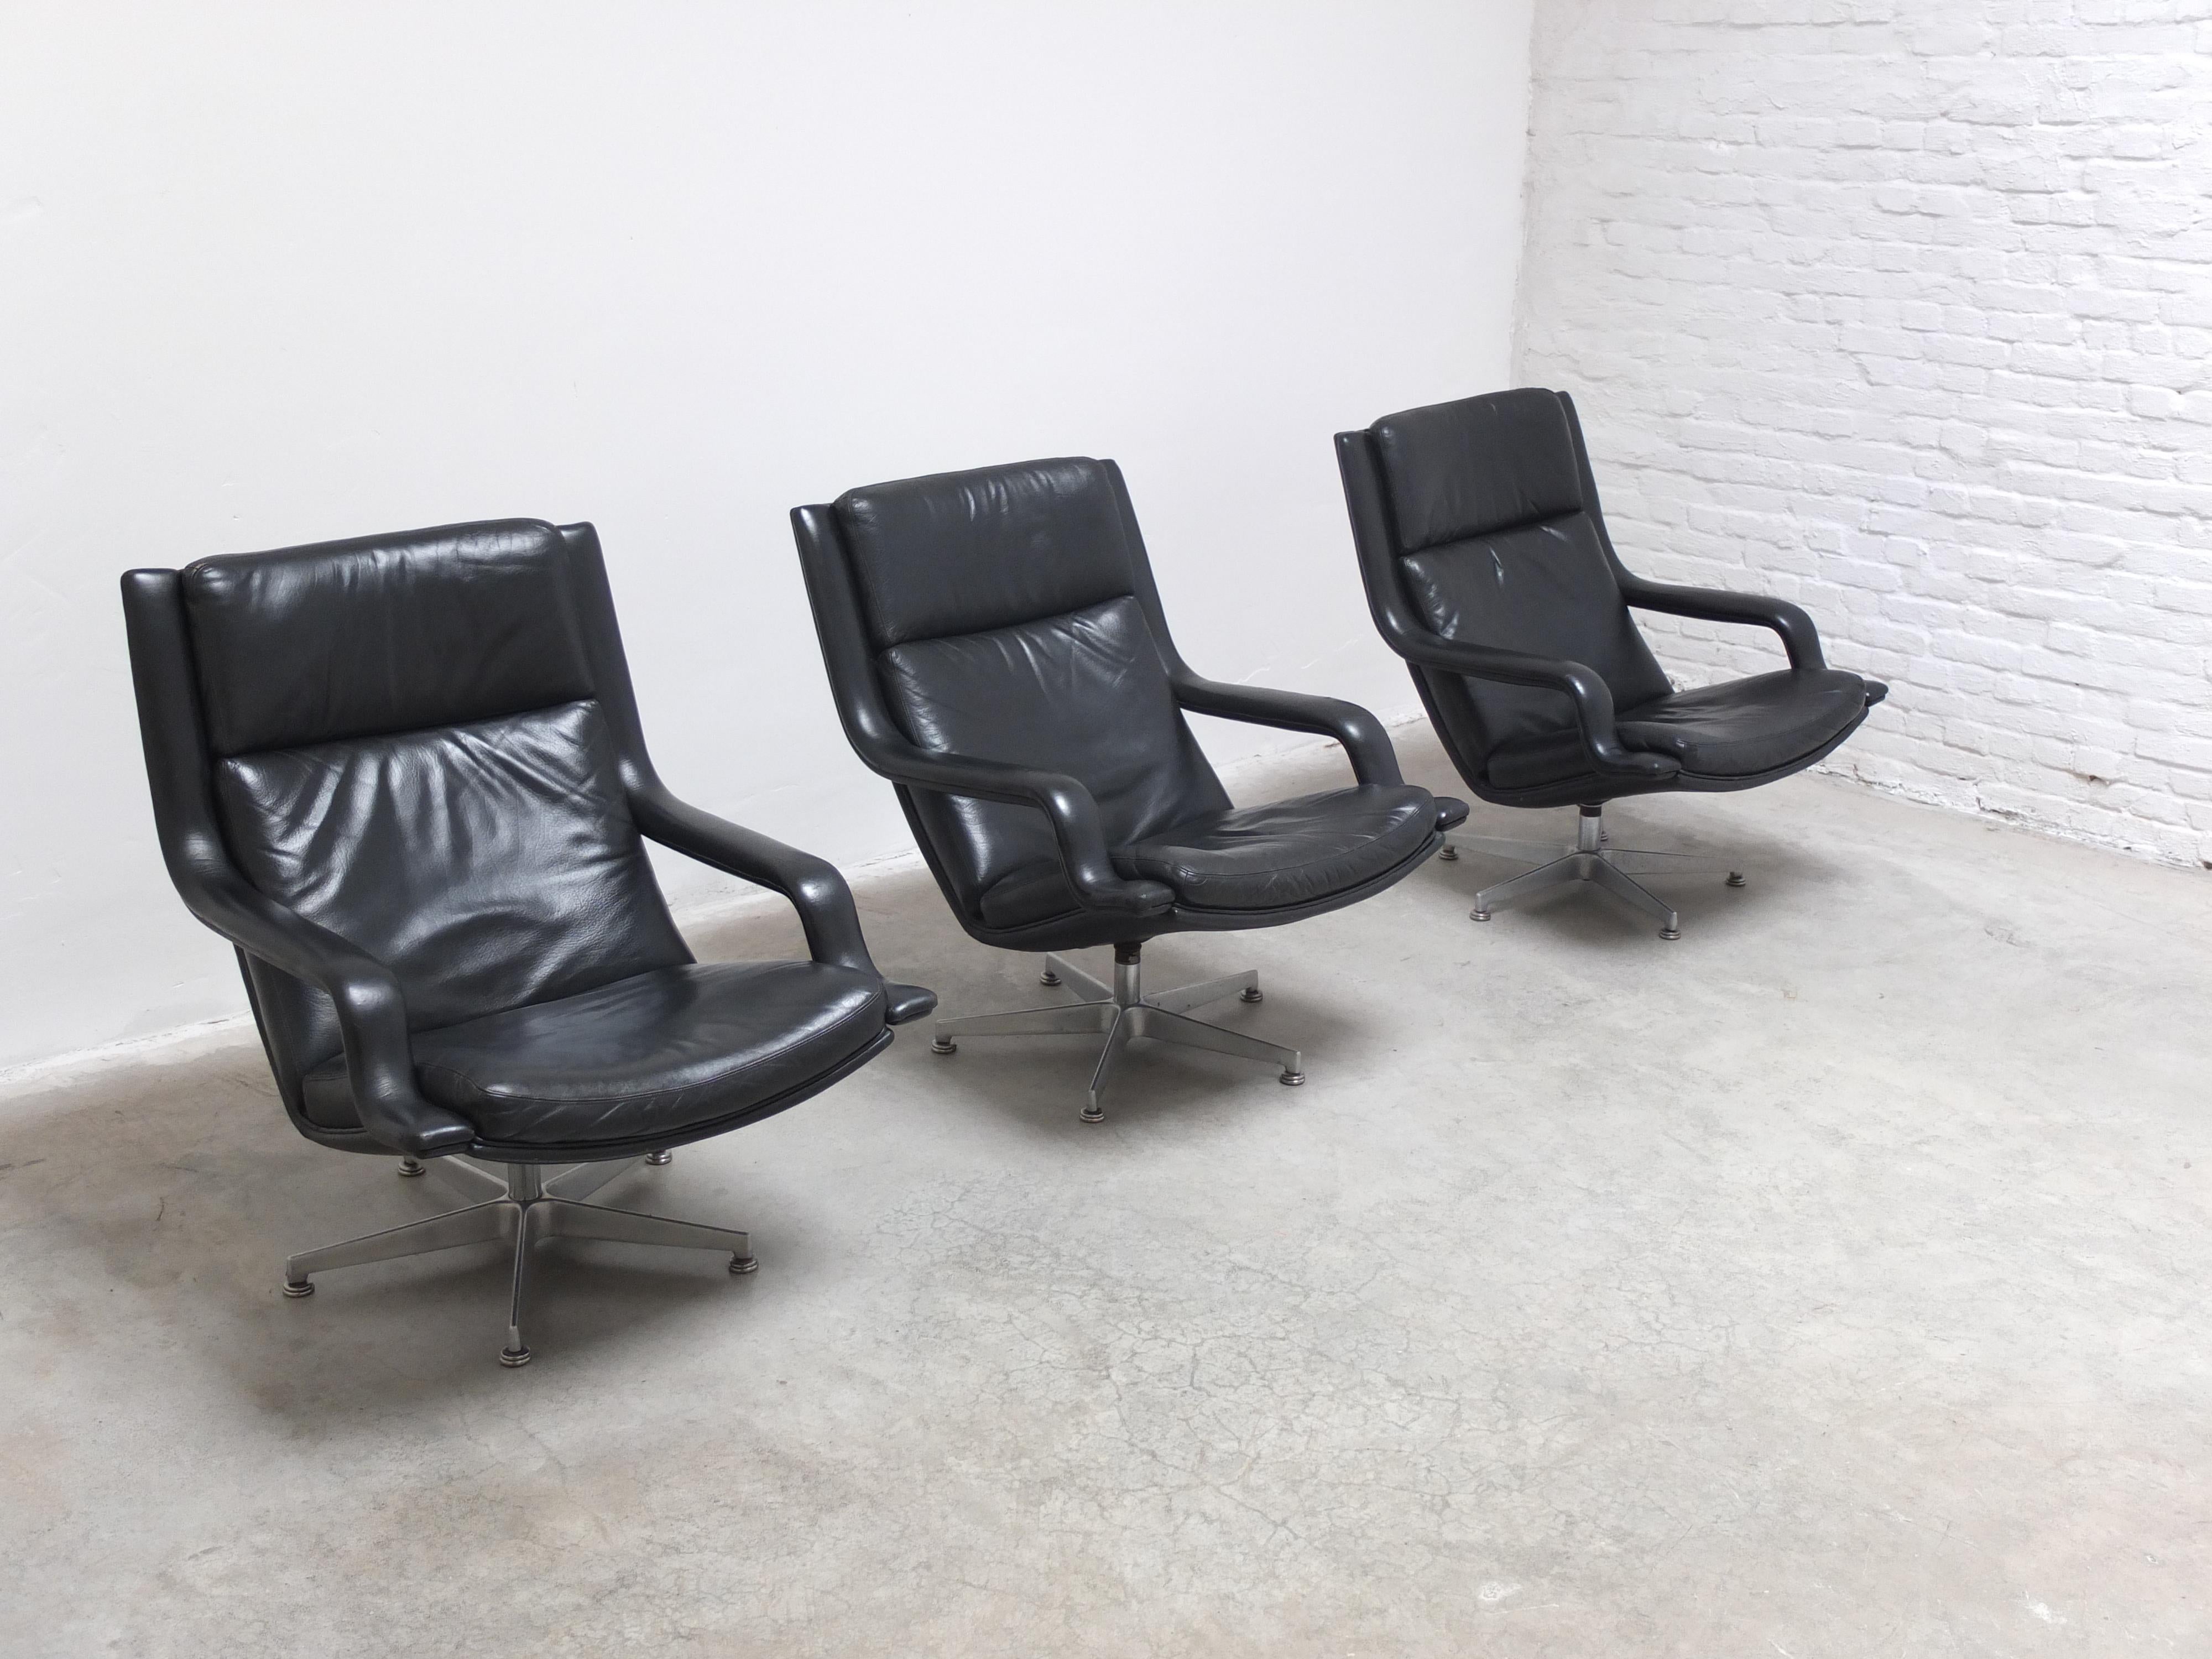 Dutch Leather 'F152' Swivel Lounge Chairs by Geoffrey Harcourt for Artifort, 1970s For Sale